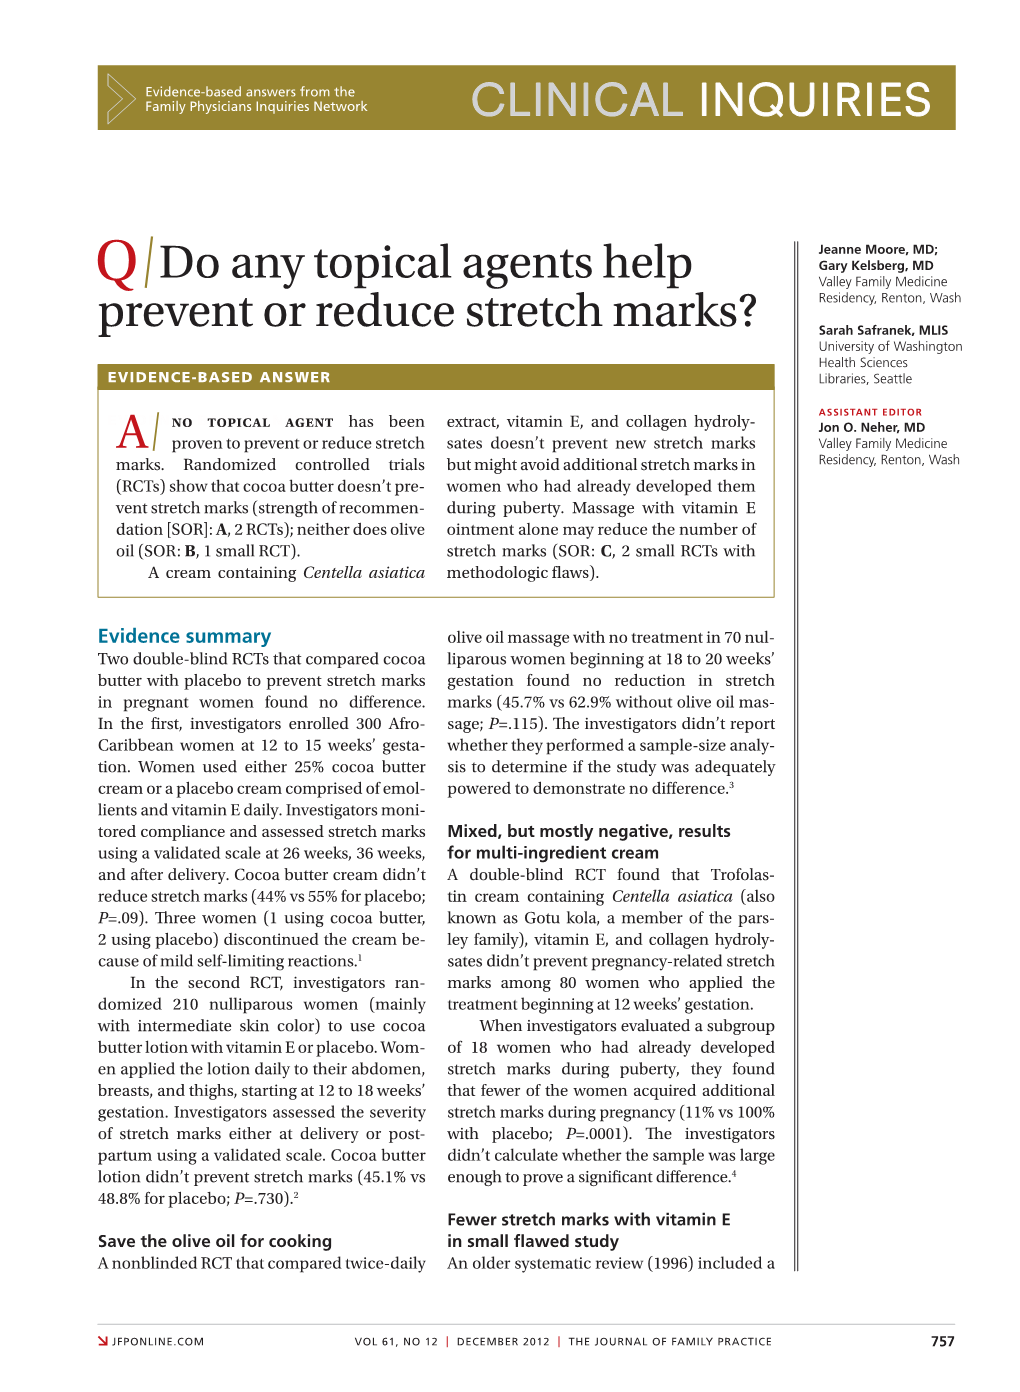 Do Any Topical Agents Help Prevent Or Reduce Stretch Marks?